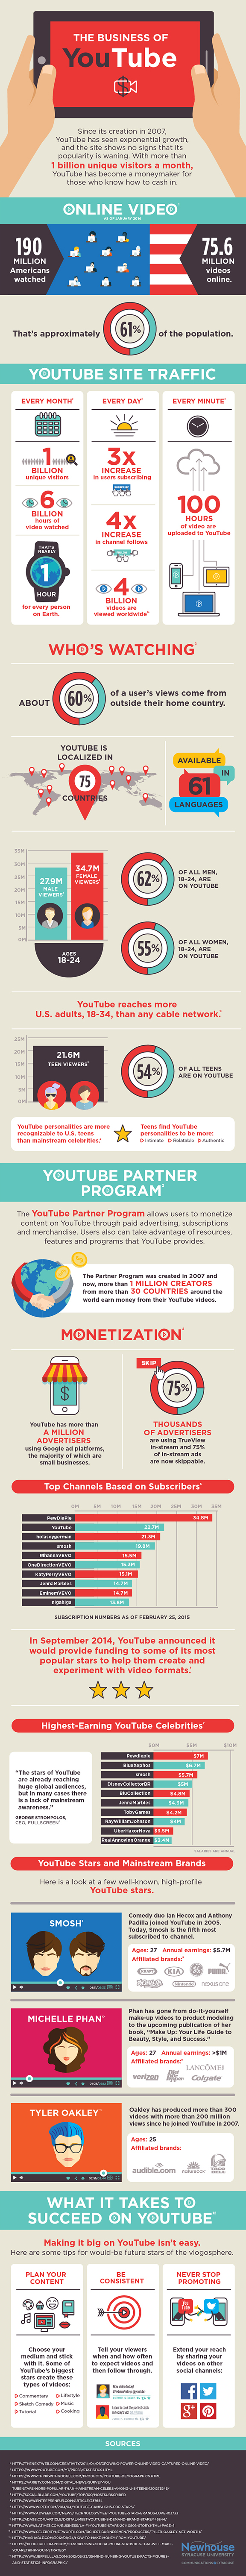 The Business of Youtube